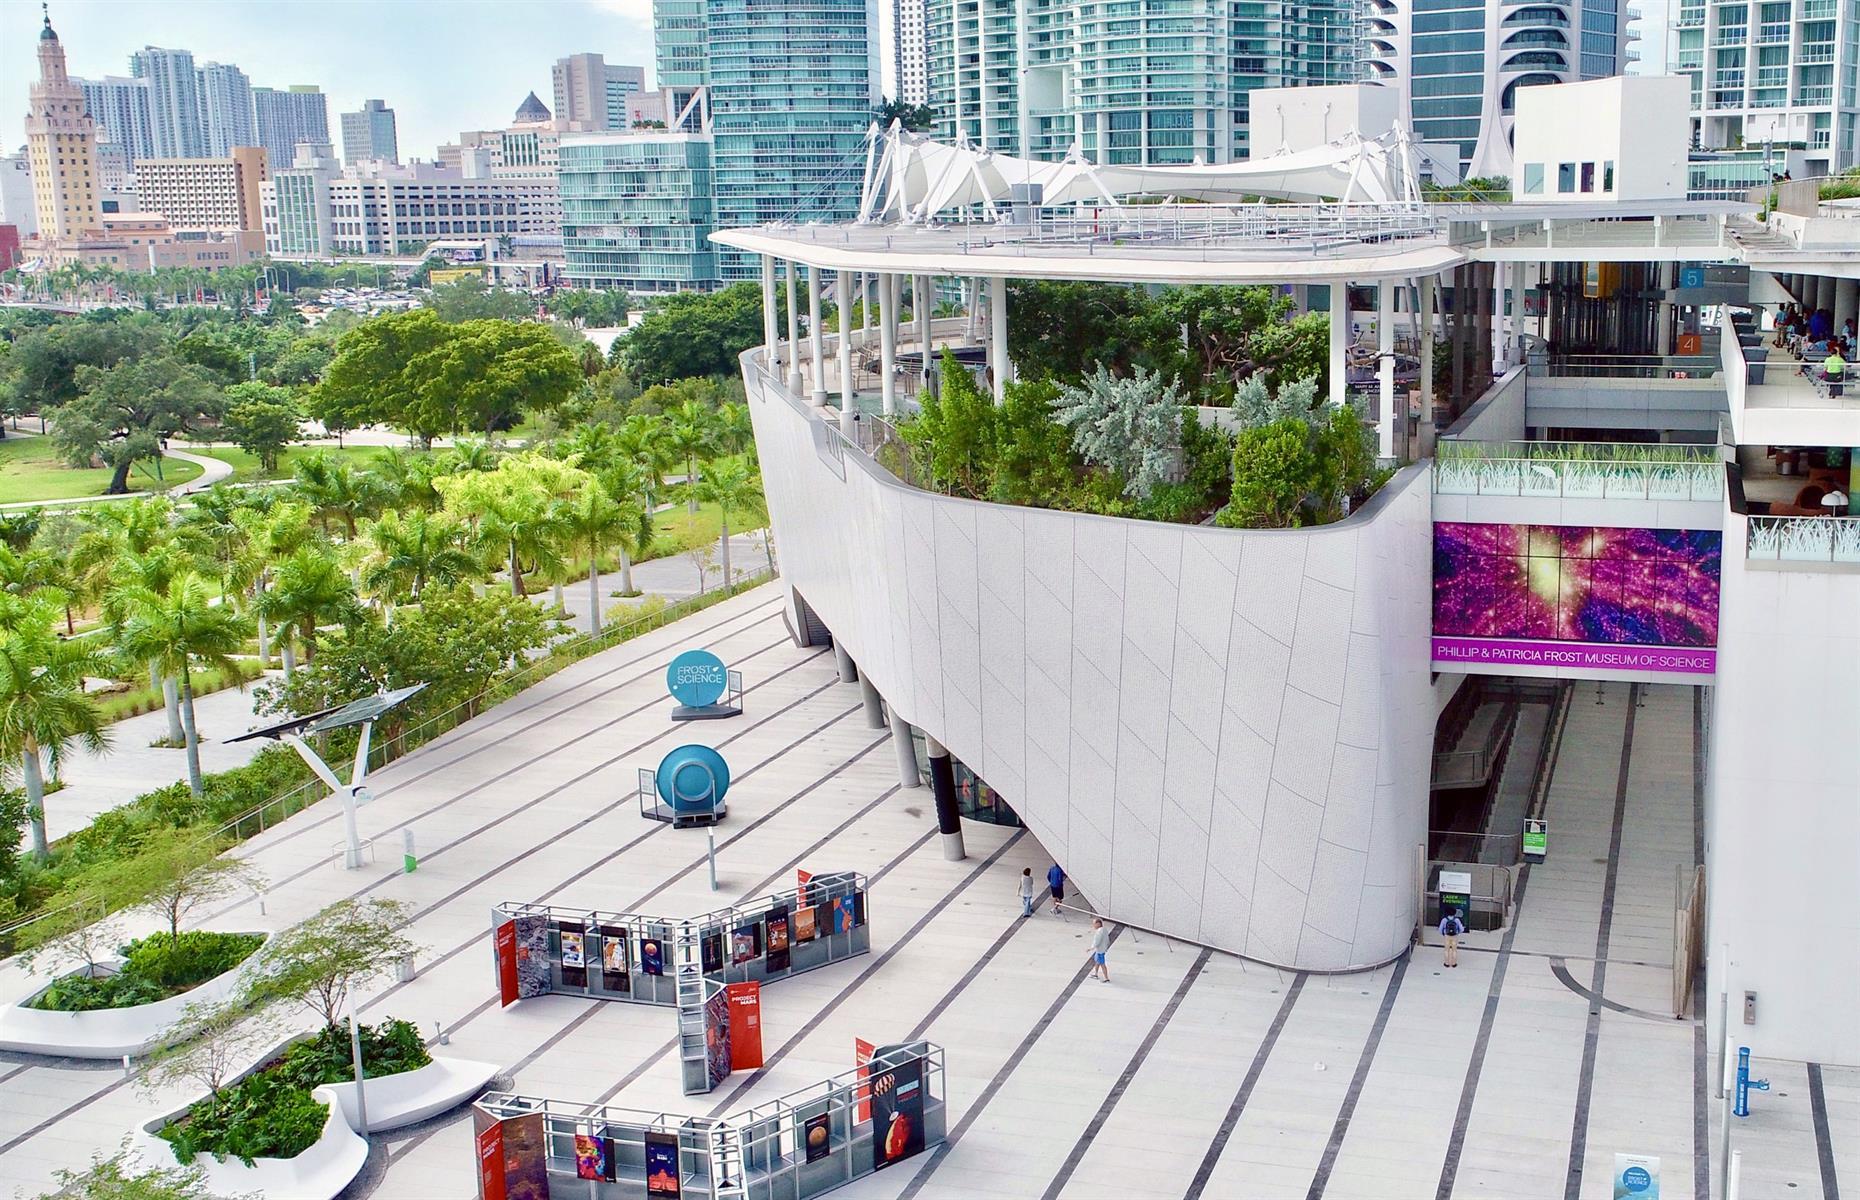 <p>At 250,000 square feet, the <a href="https://www.frostscience.org/location/miami-science-museum/">Phillip and Patricia Frost Museum of Science</a> is a universe in miniature – comprising an impressive Gulf Stream aquarium, a 250-seat planetarium, and two wings of exhibits. From the depths of the ocean to the history of Black astronauts pushing the boundaries of space exploration, this interactive museum is the ultimate celebration of our world. Find it in Maurice A. Ferré Park, formerly Museum Park, in downtown Miami.</p>  <p><a href="https://www.facebook.com/loveexploringUK?utm_source=msn&utm_medium=social&utm_campaign=front"><strong>Love this? Follow our Facebook page for more travel inspiration</strong></a></p>